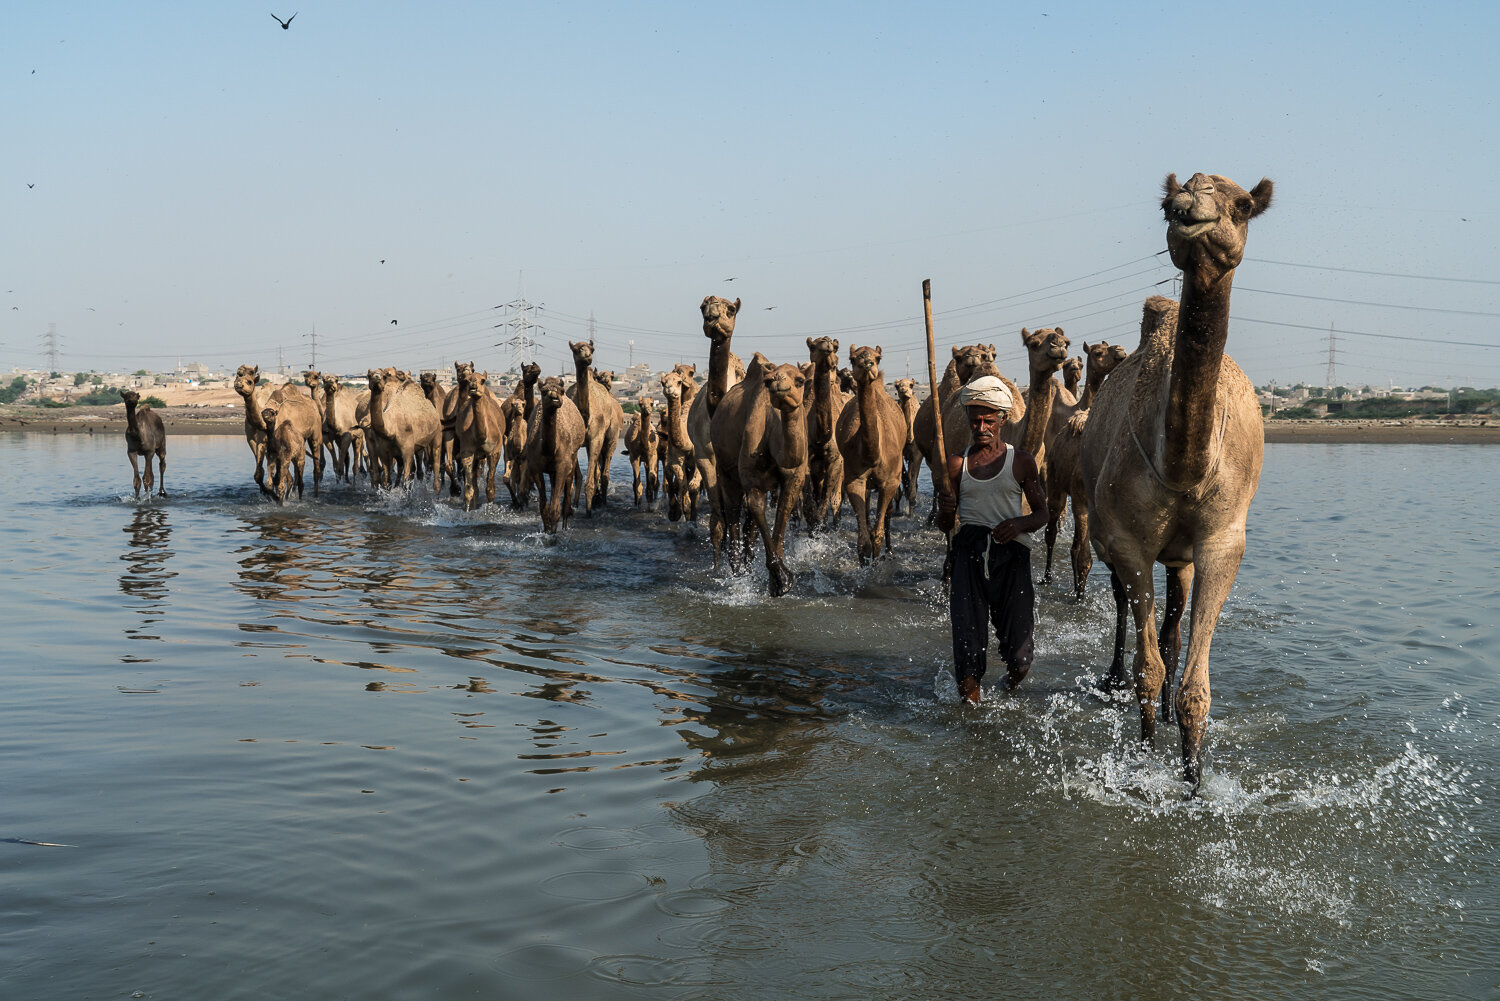  A herd of camels is led to graze on mangroves in the Indus River delta on Saturday, October 12, 2019 in Ibrahim Hyderi, Sindh, Pakistan. 